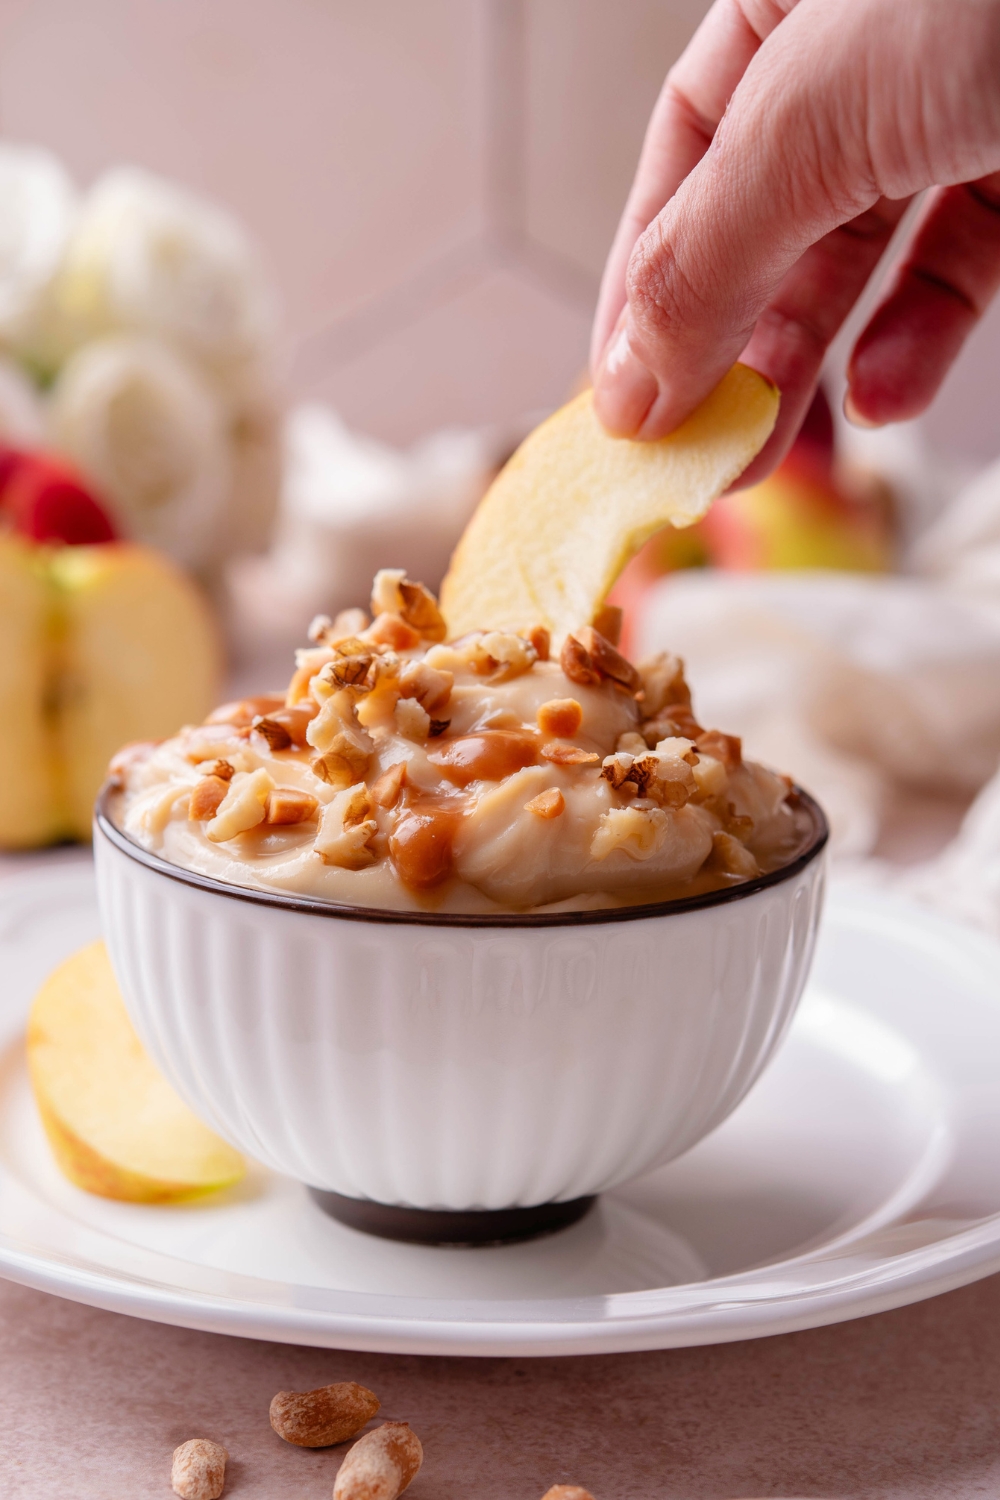 A hand holding an apple slice dipping it into a white bowl that's filled with caramel apple dip.